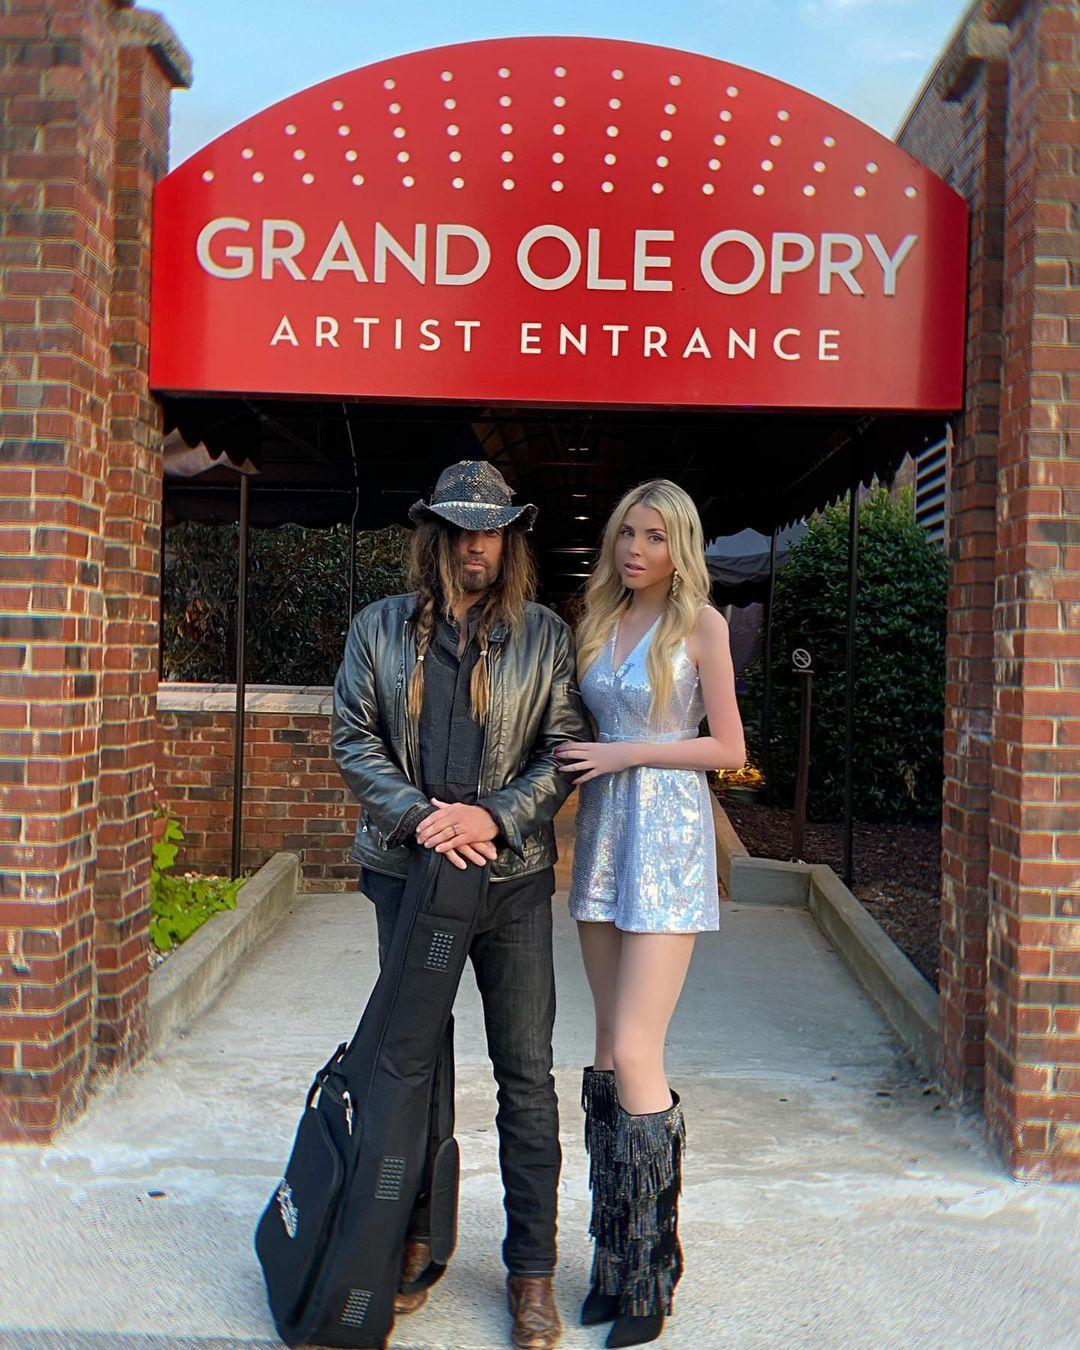 Firerose and Billy Ray Cyrus pose together outside the Grand Ole Opry